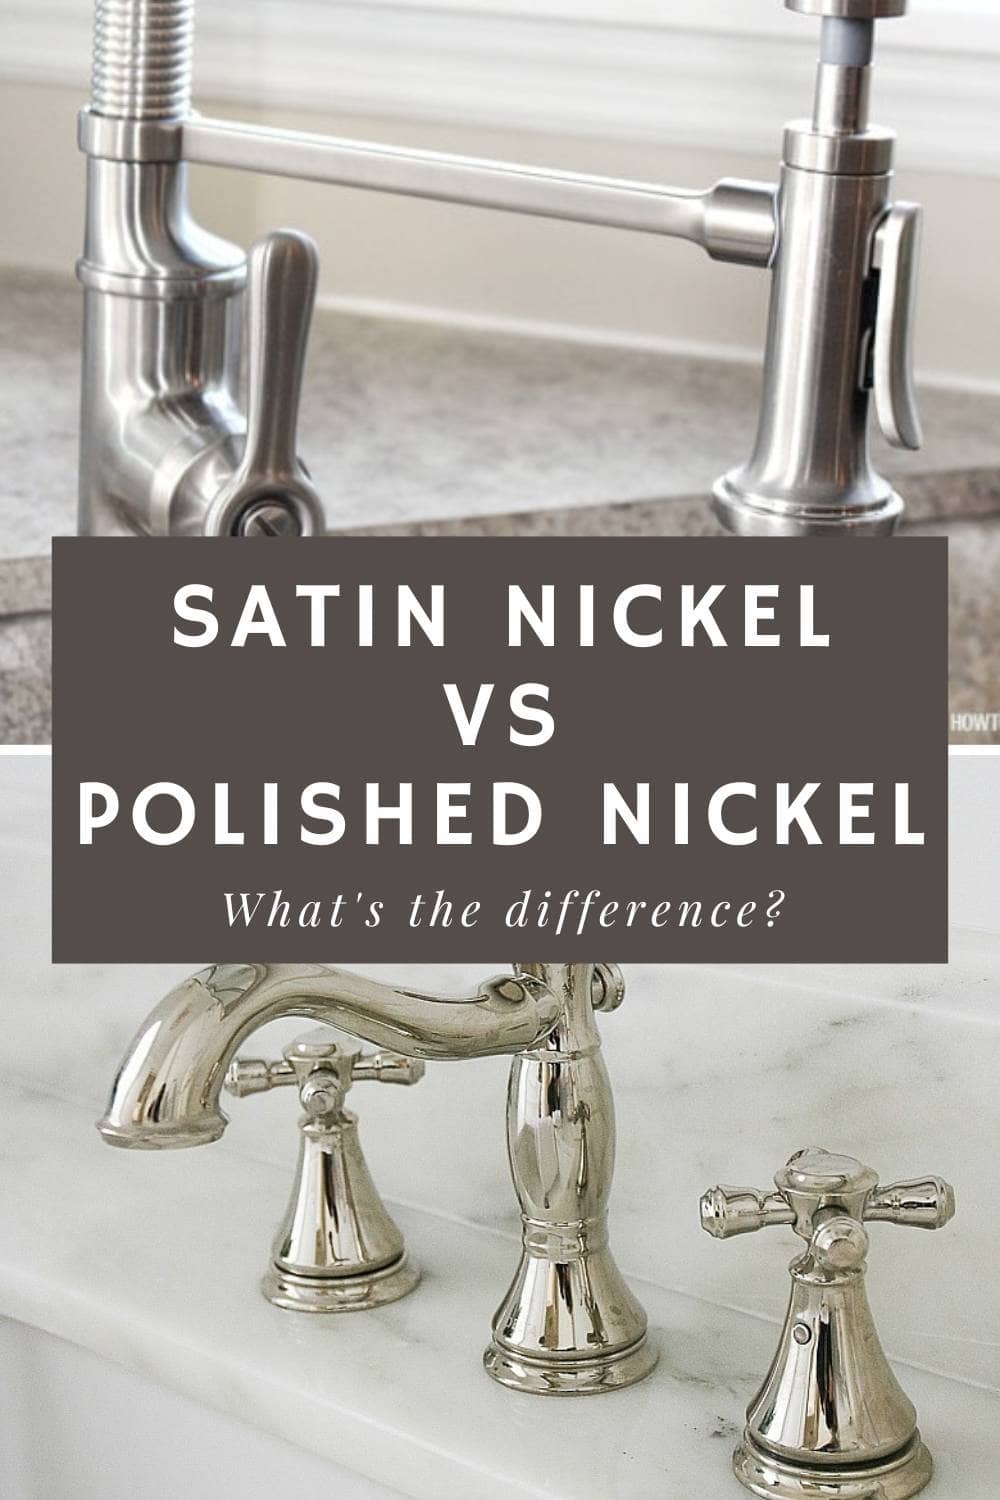 https://howtonestforless.com/wp-content/uploads/2023/03/satin-nickel-vs-polished-nickel-whats-the-difference-1.jpeg